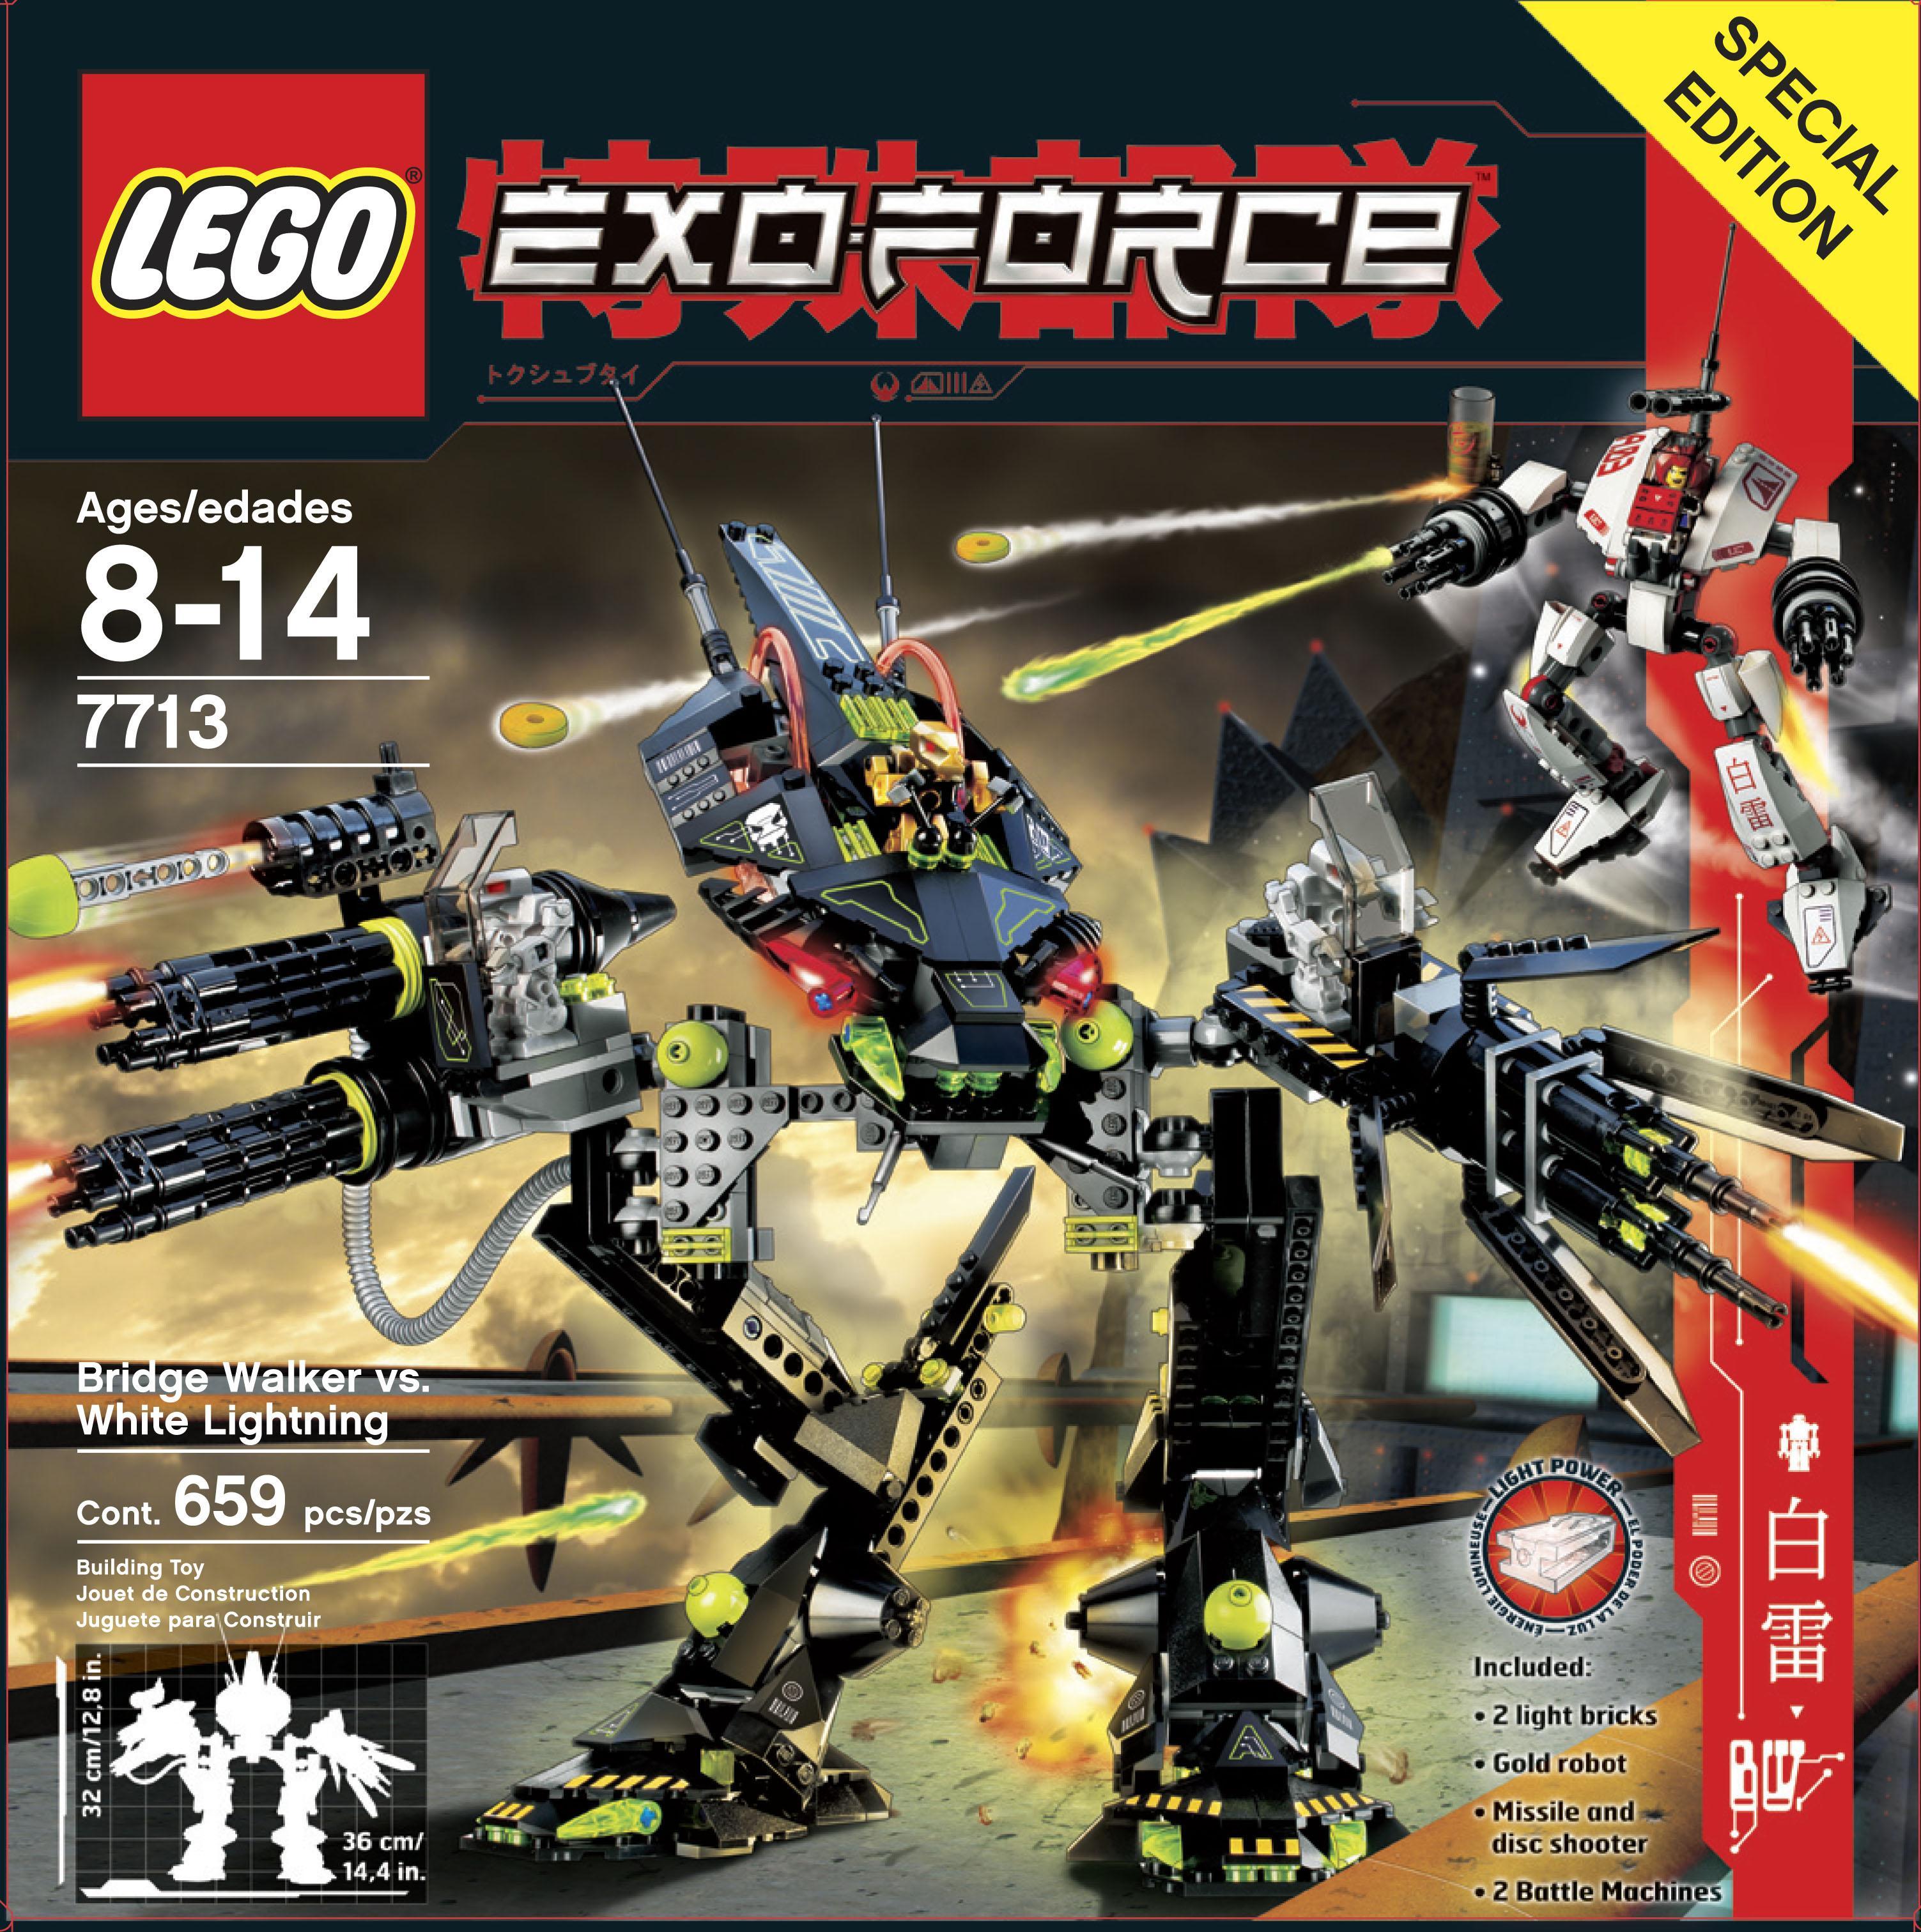 Exo-Force! - - The TTV Message Boards